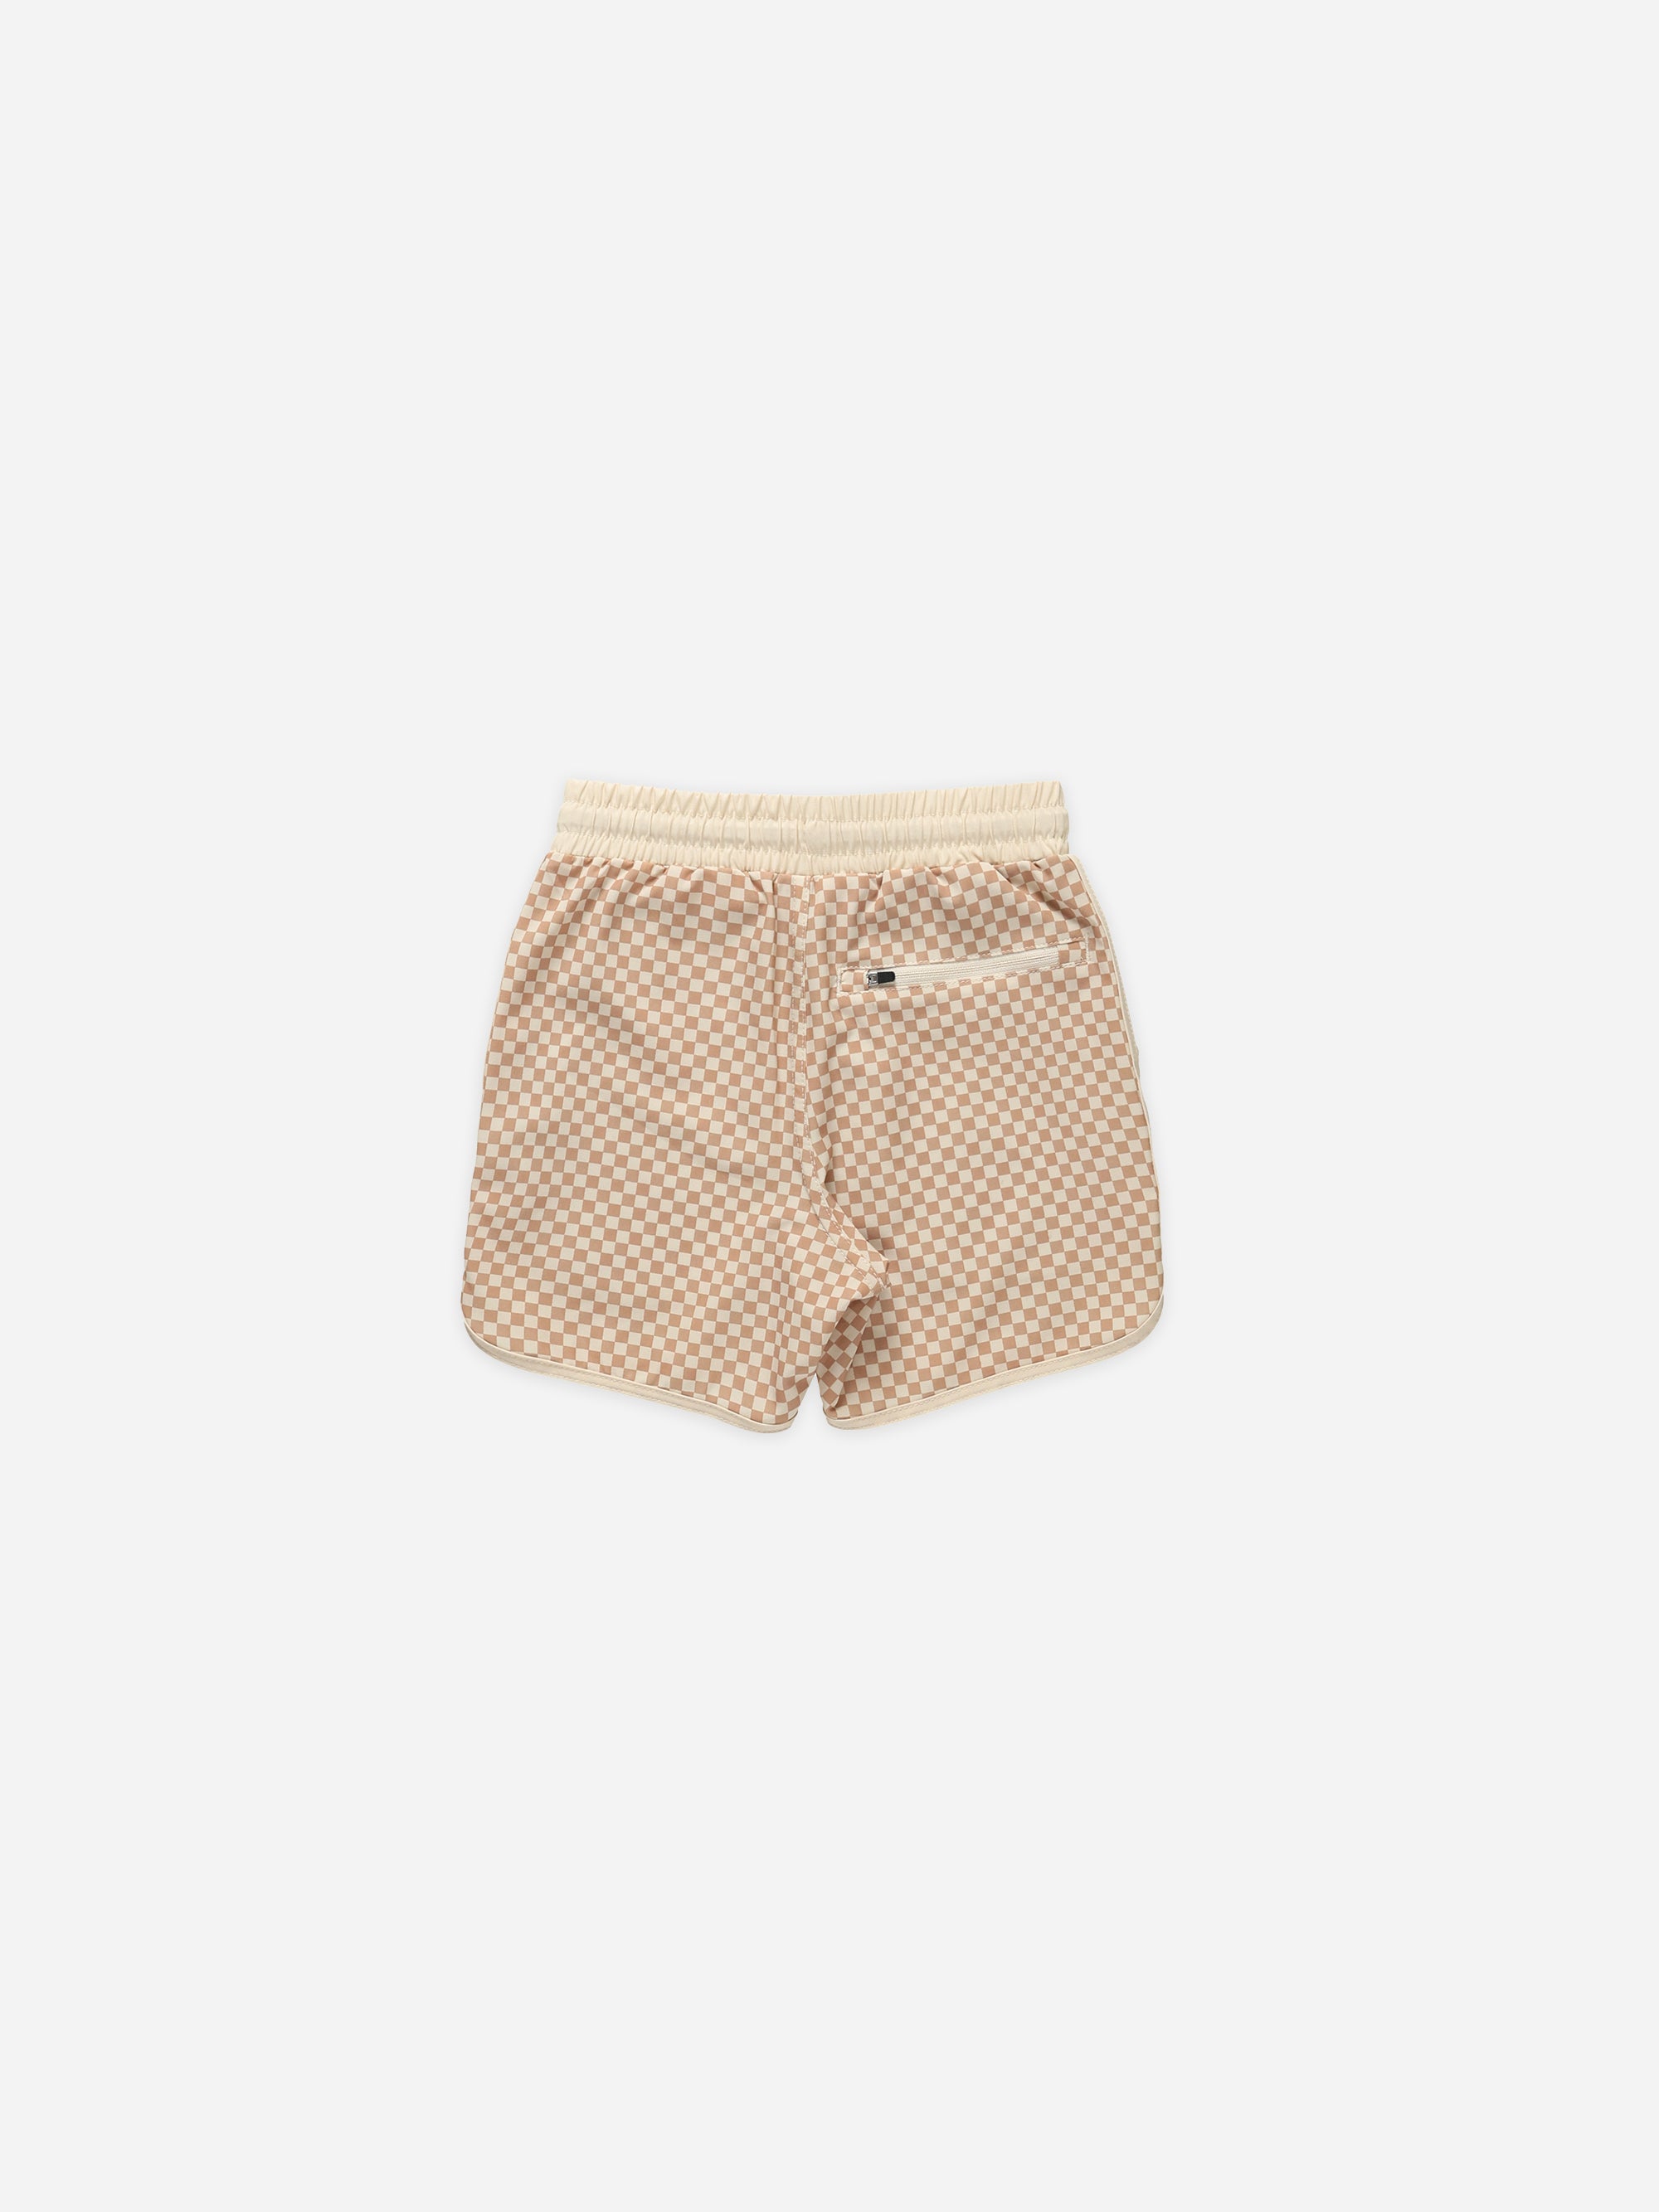 Del Mar Short || Clay Micro Check - Rylee + Cru | Kids Clothes | Trendy Baby Clothes | Modern Infant Outfits |